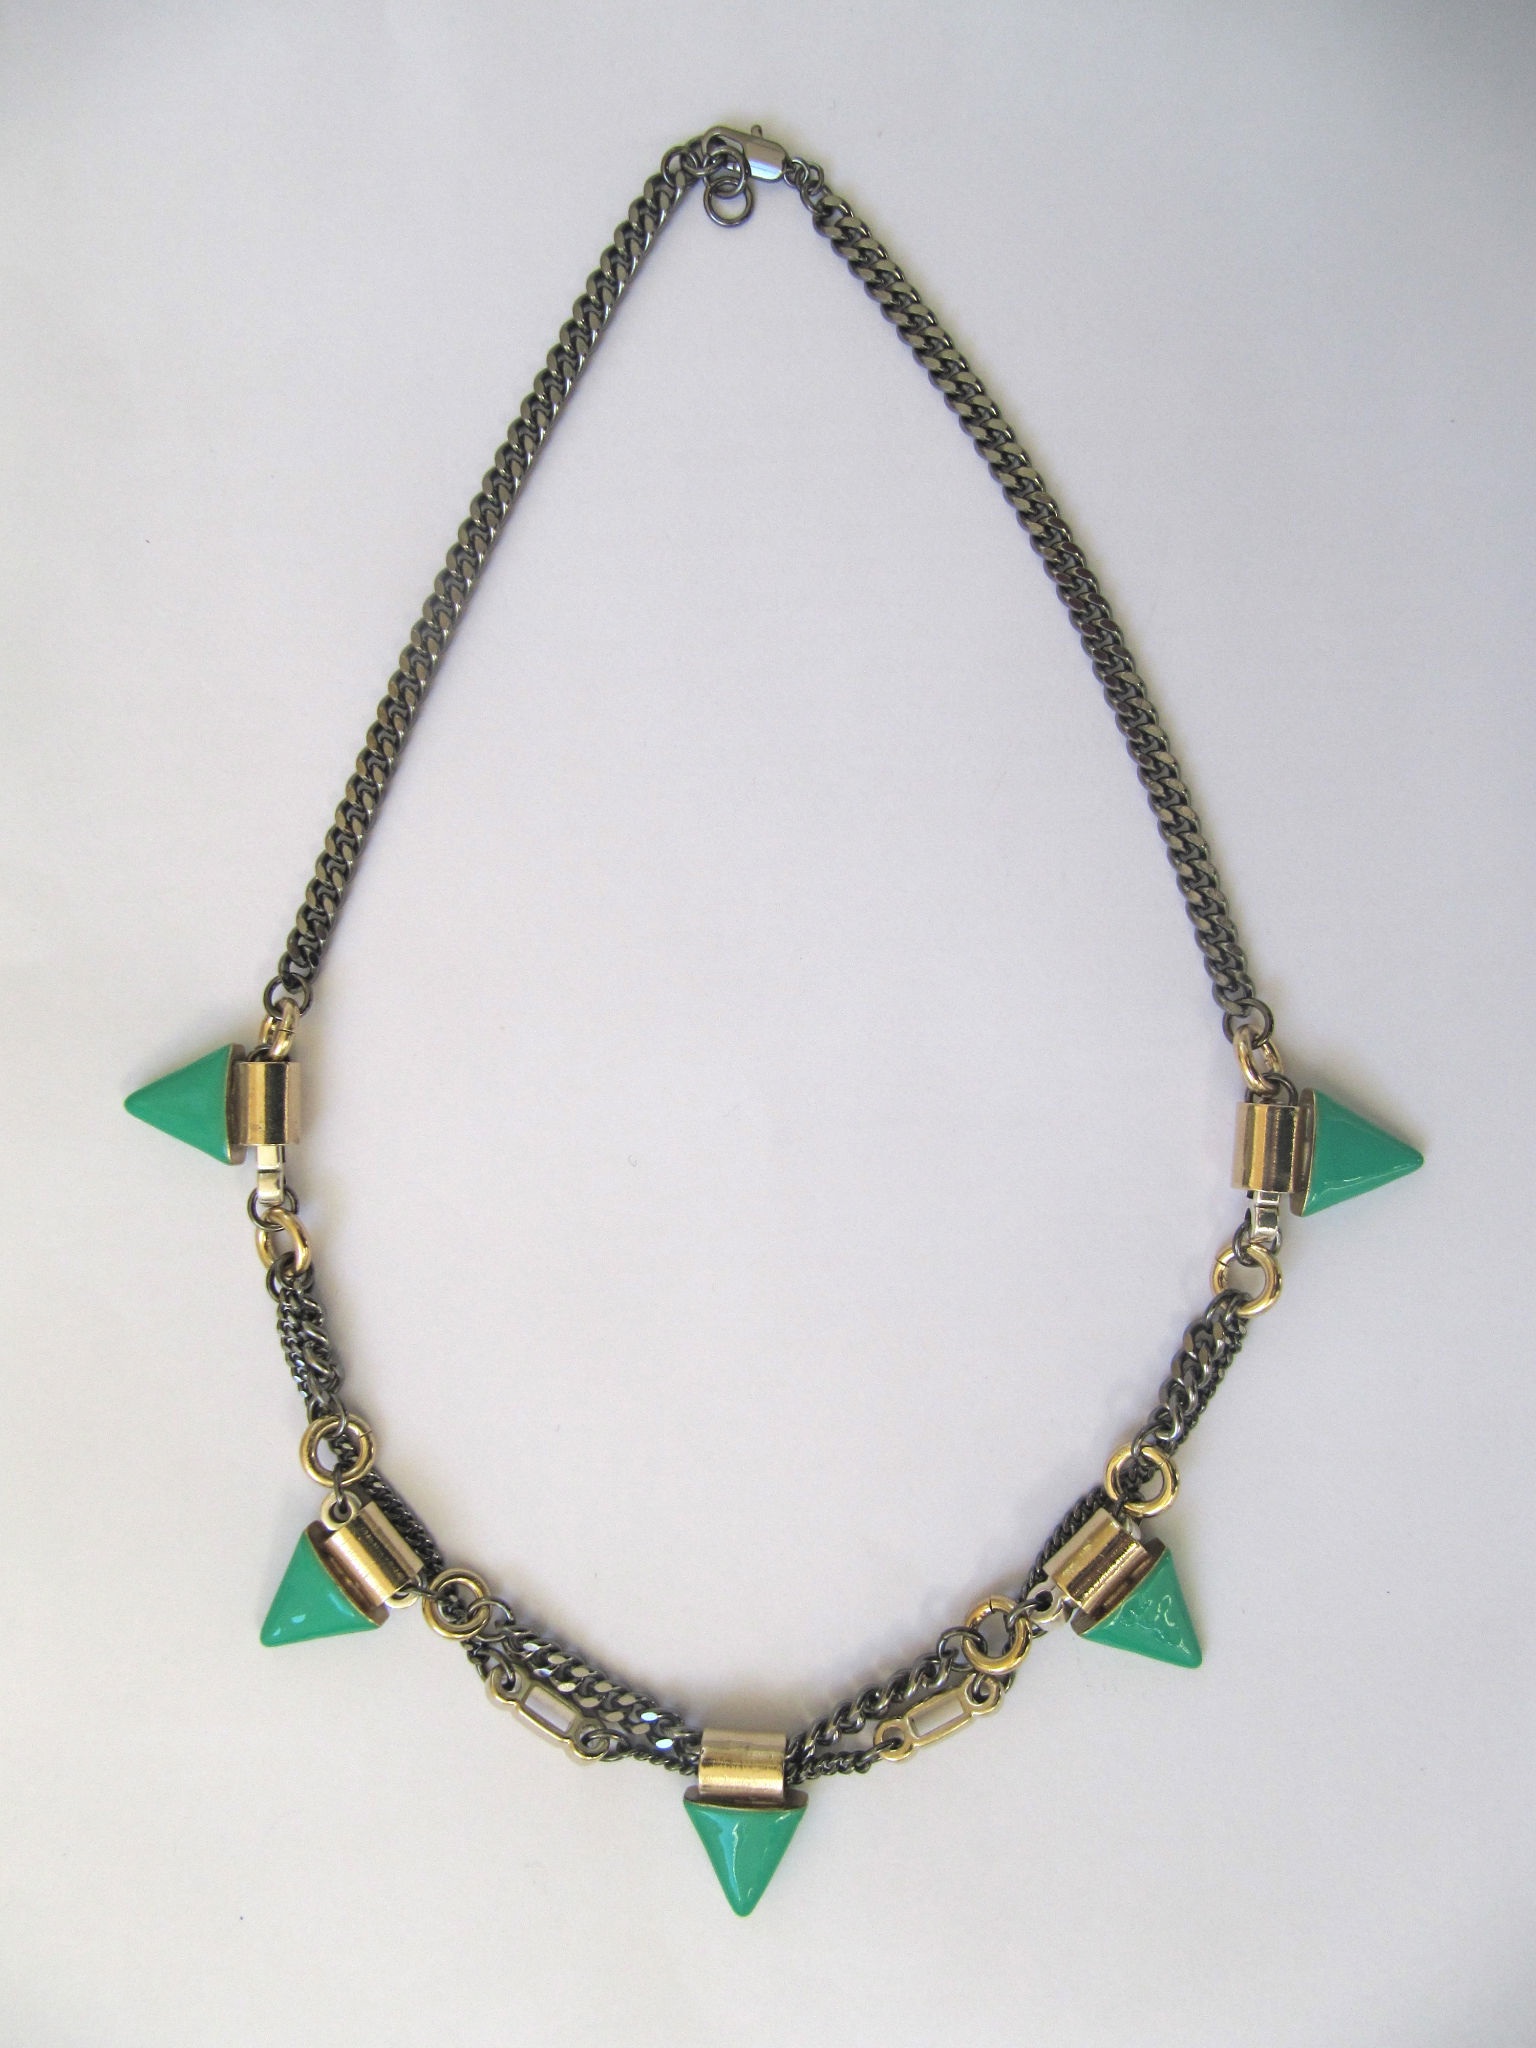 AZTEC TEETH IN GREEN WITH RUTHENIUM AND GOLD CHAIN stella telegraph top 50 found bath boutique designer shop